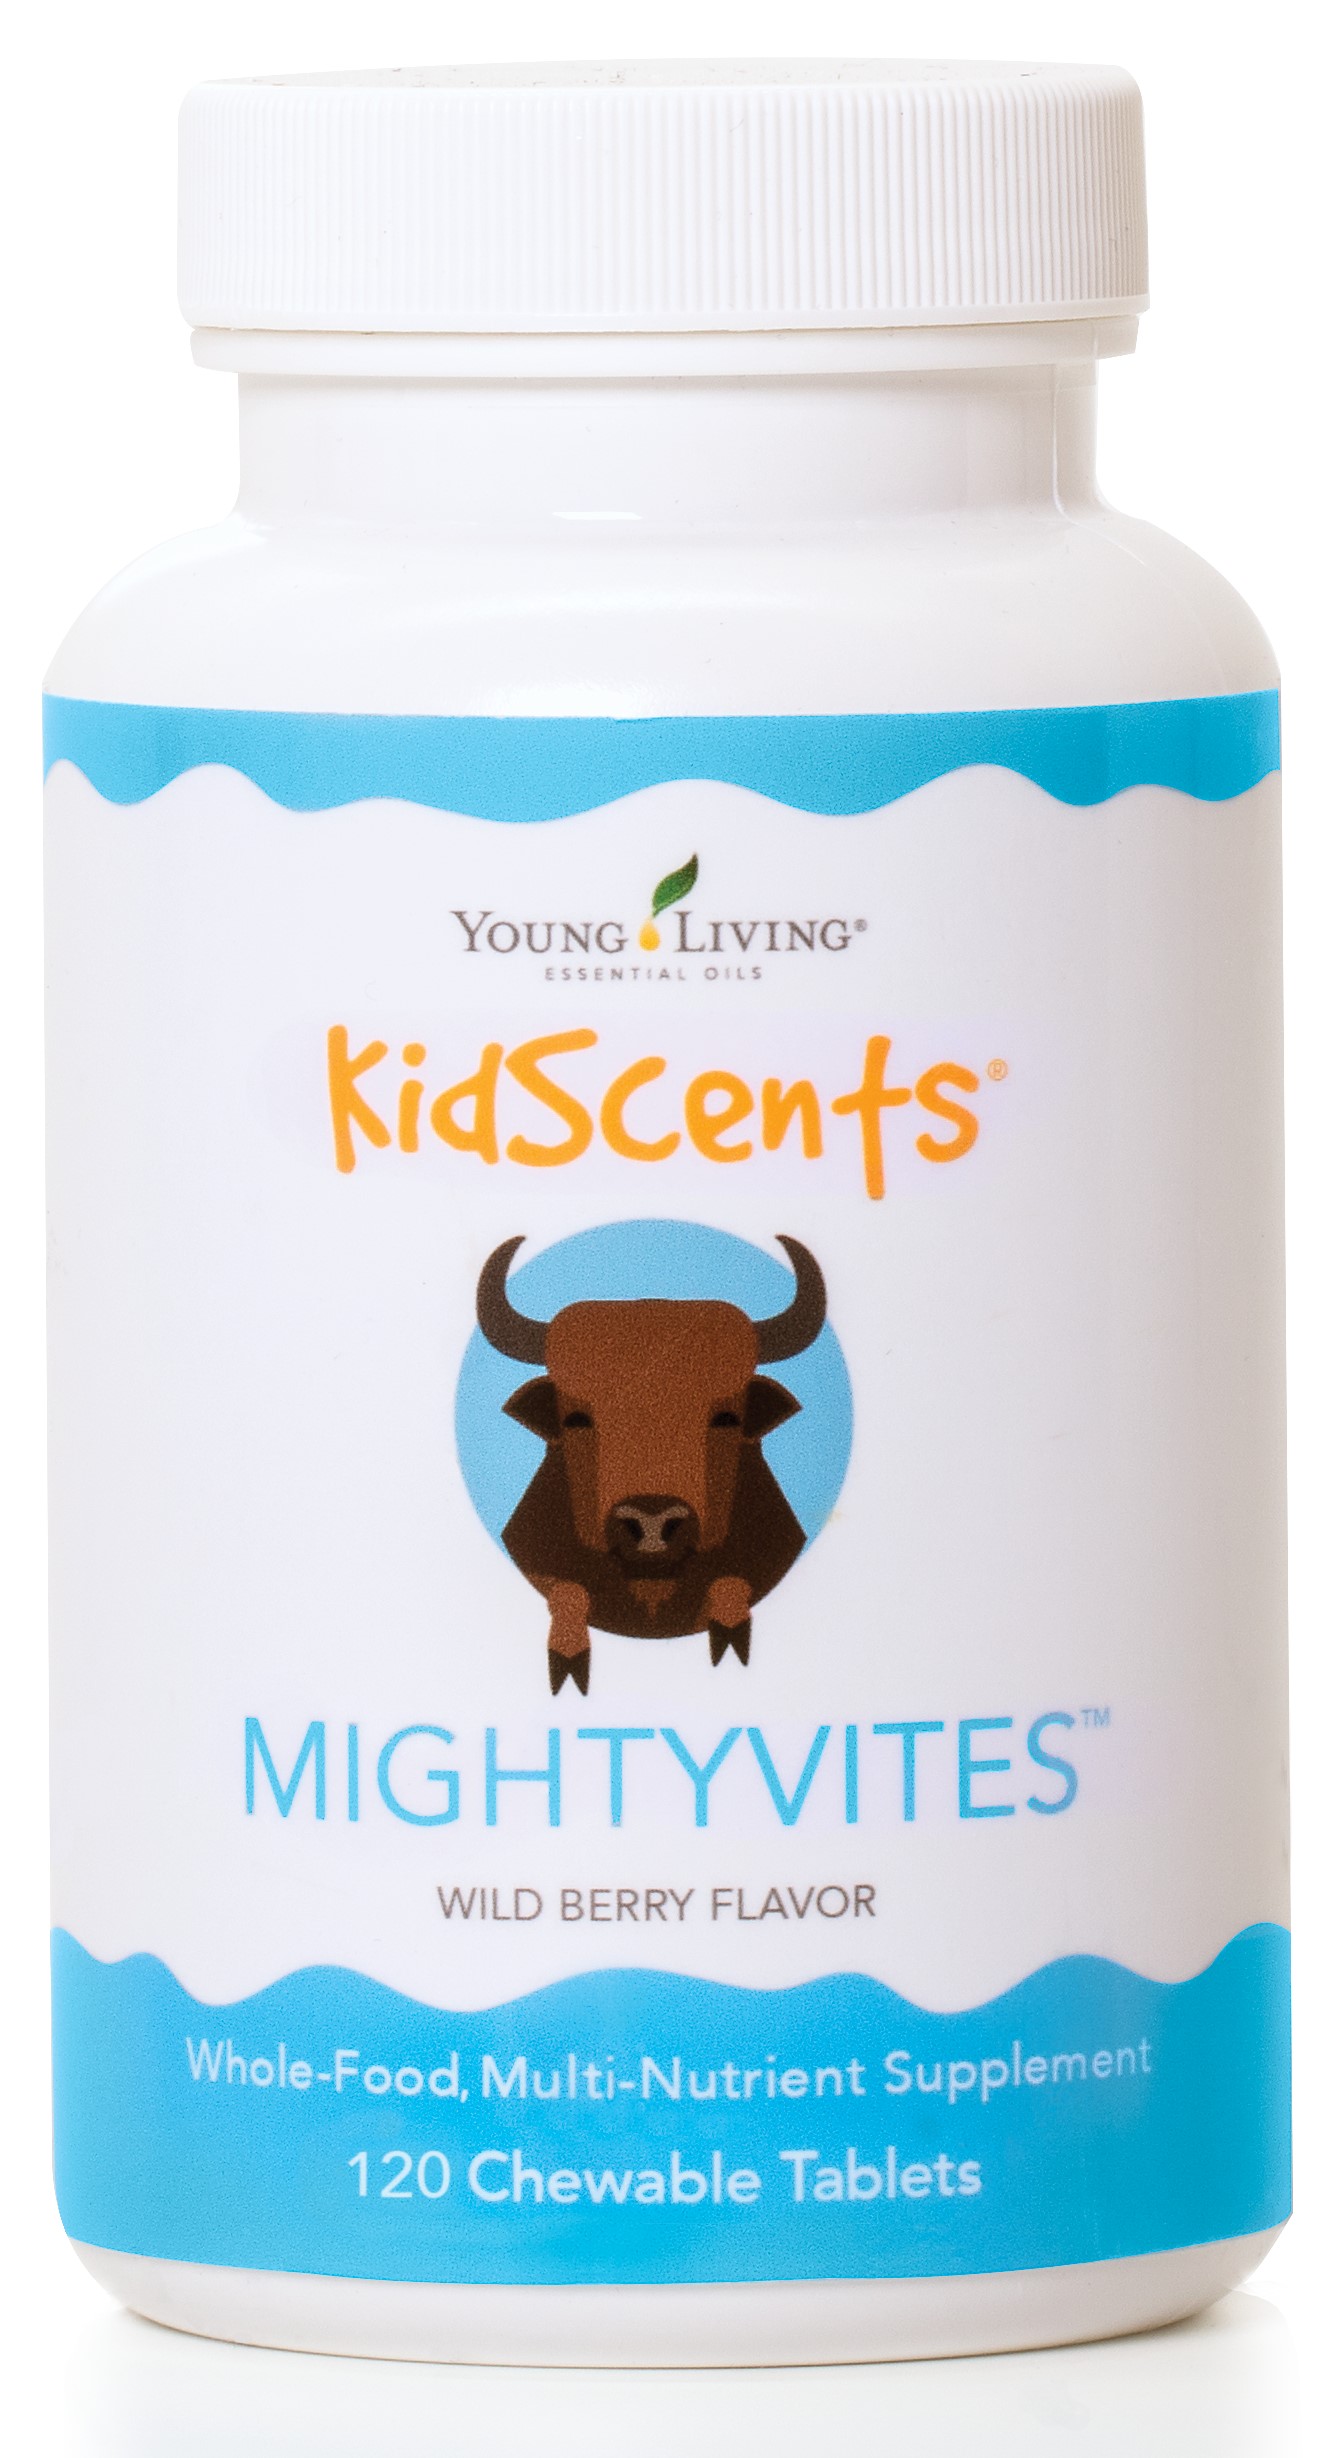 KidScents MightyVites Chewable Tablets - Young Living Essential Oils 